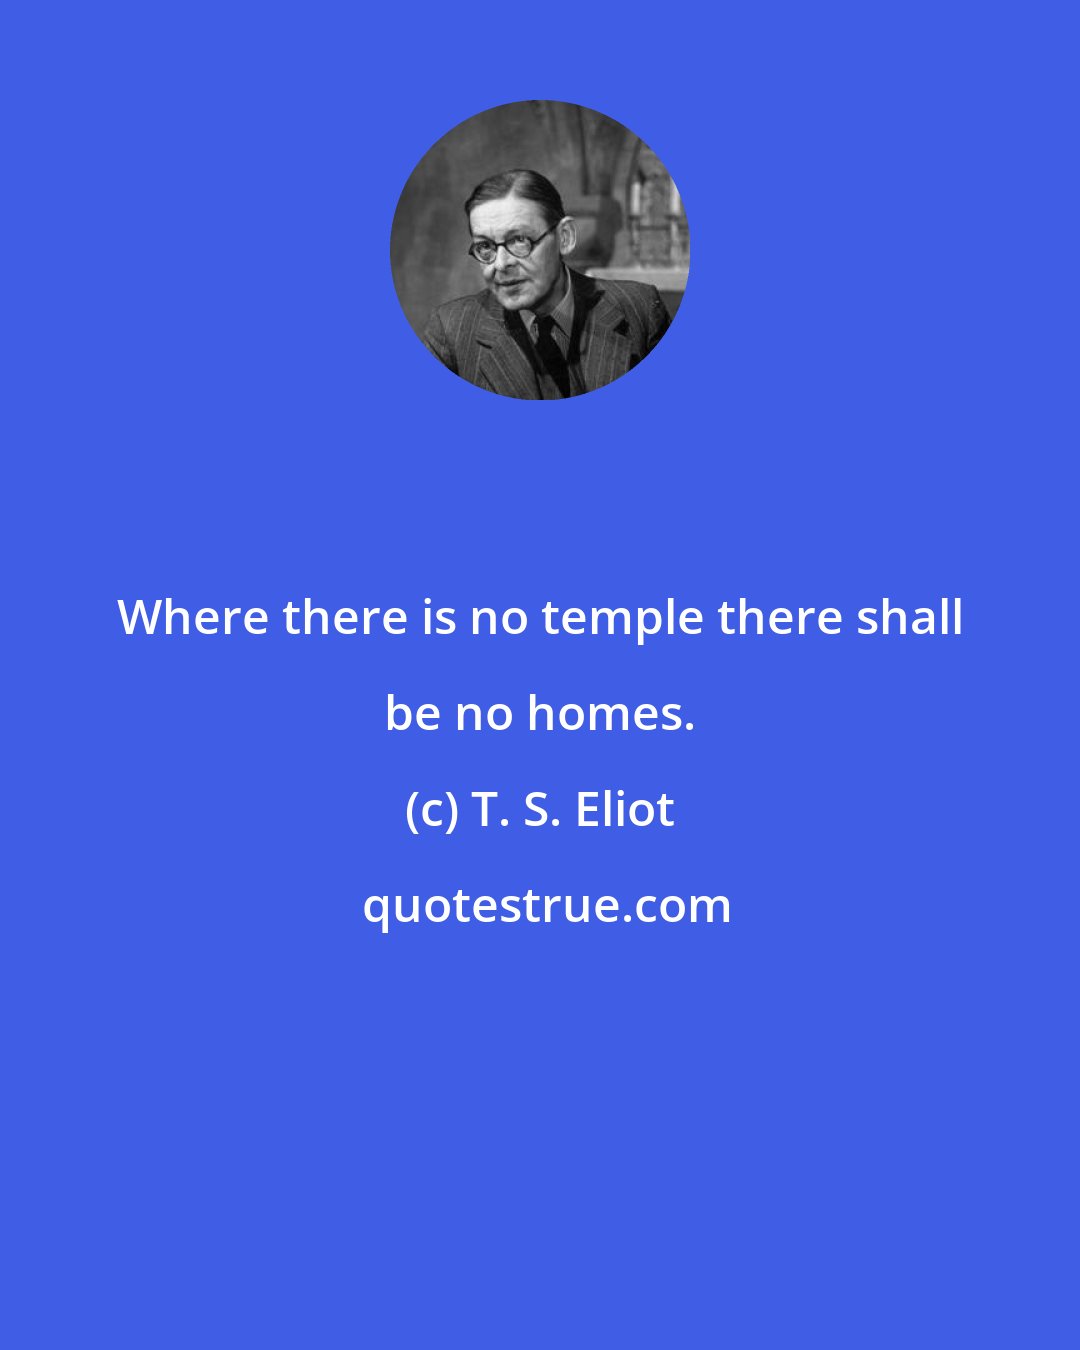 T. S. Eliot: Where there is no temple there shall be no homes.